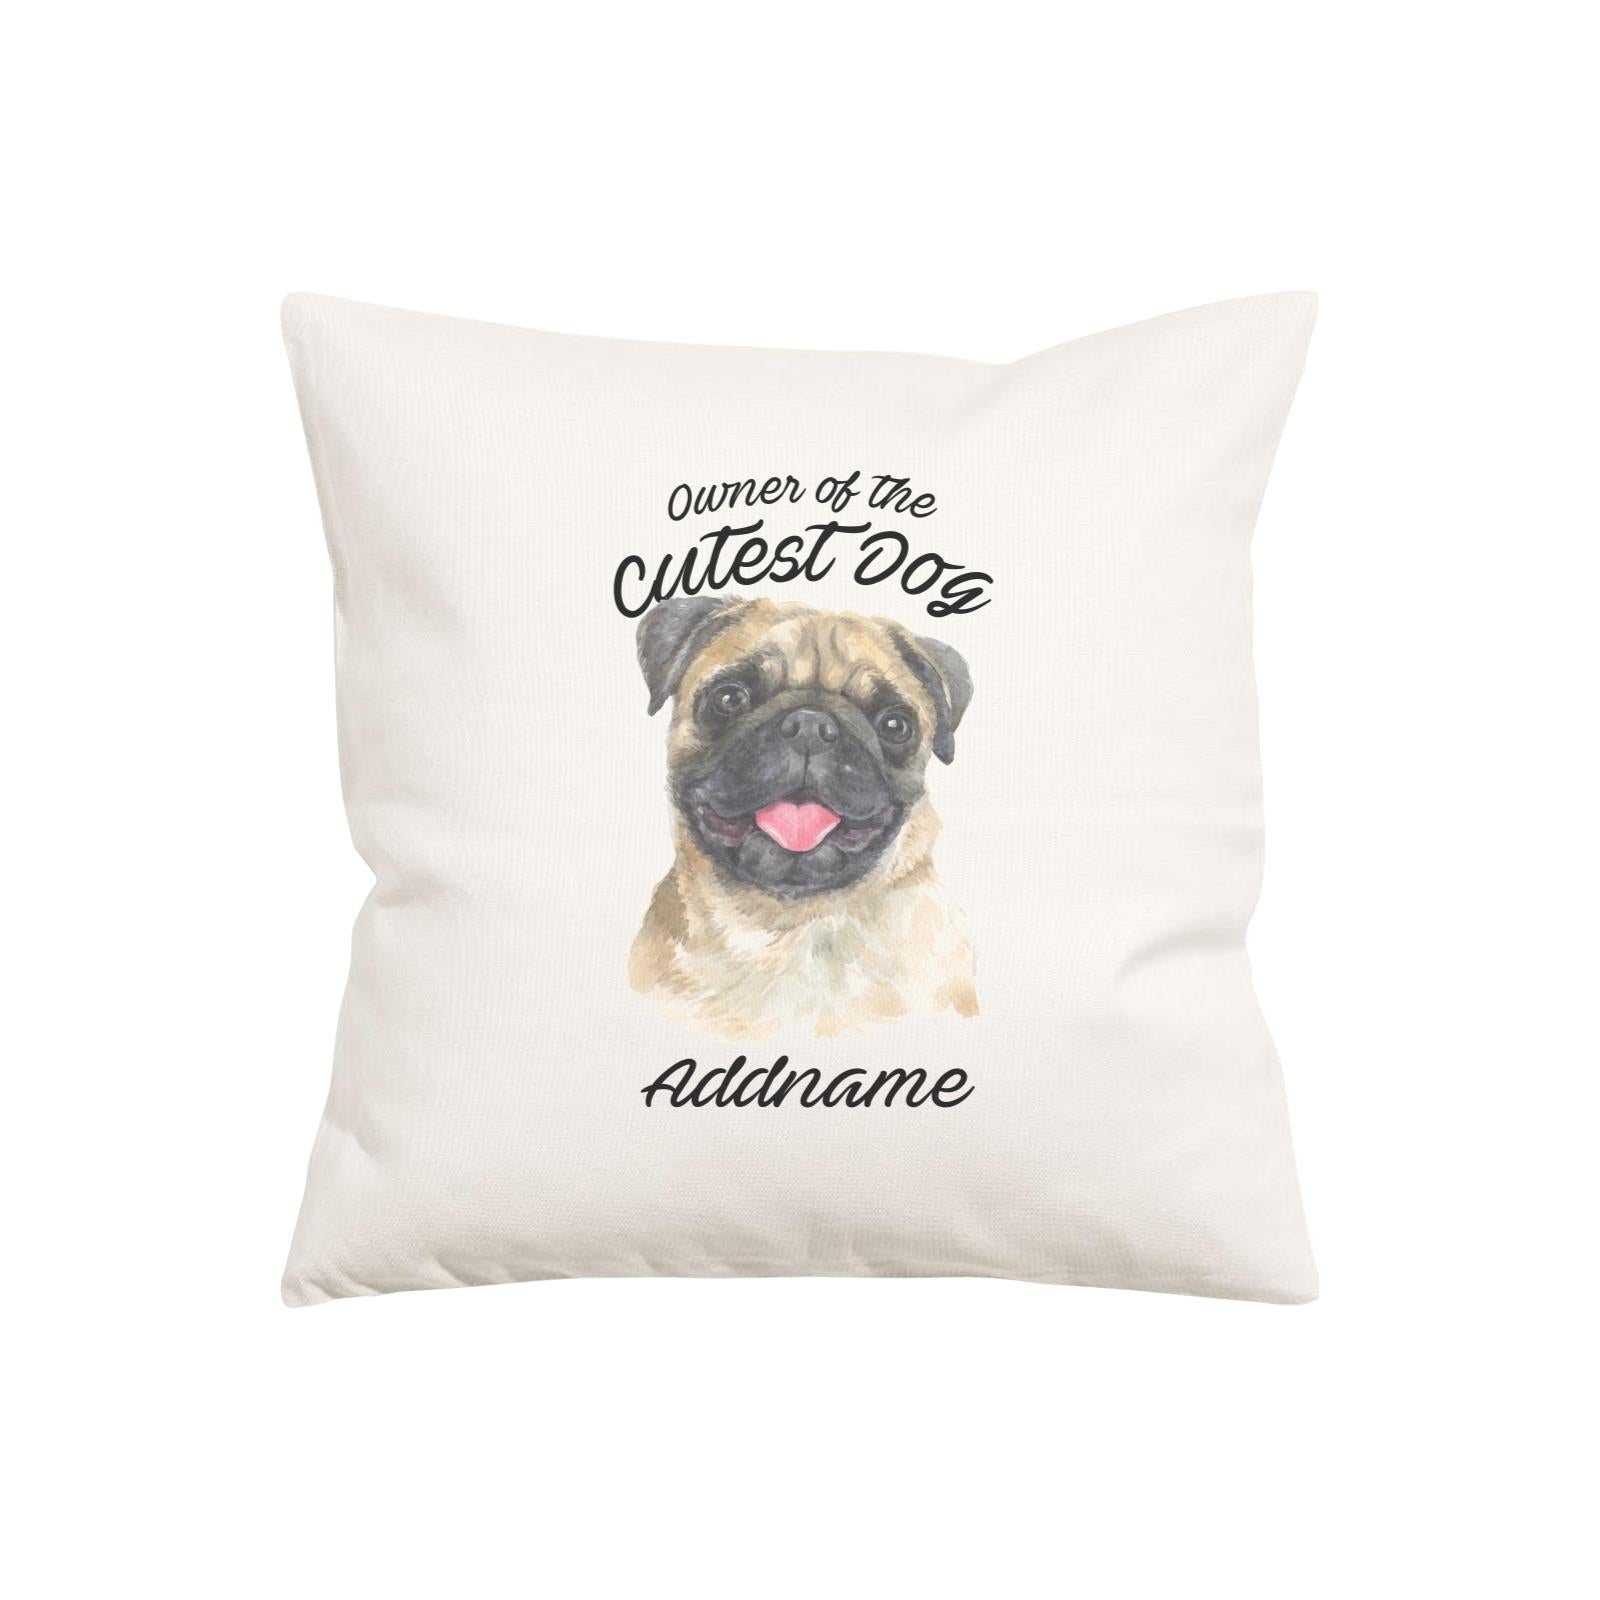 Watercolor Dog Owner Of The Cutest Dog Pug Addname Pillow Cushion